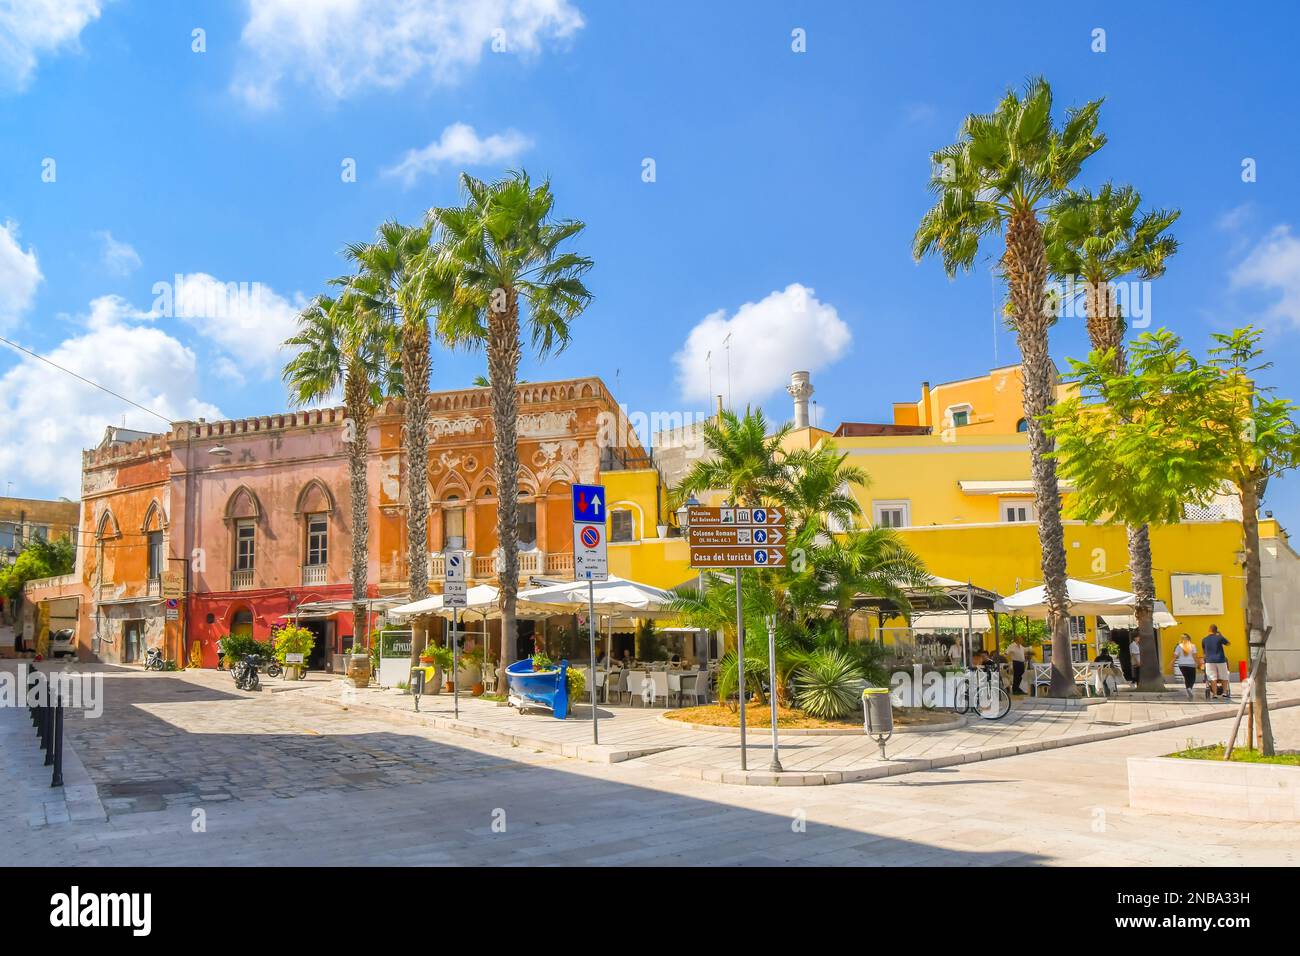 A sidewalk cafe with covered patio at the seaside promenade and boardwalk in the city of Brindisi, Italy, in the Puglia region. Stock Photo